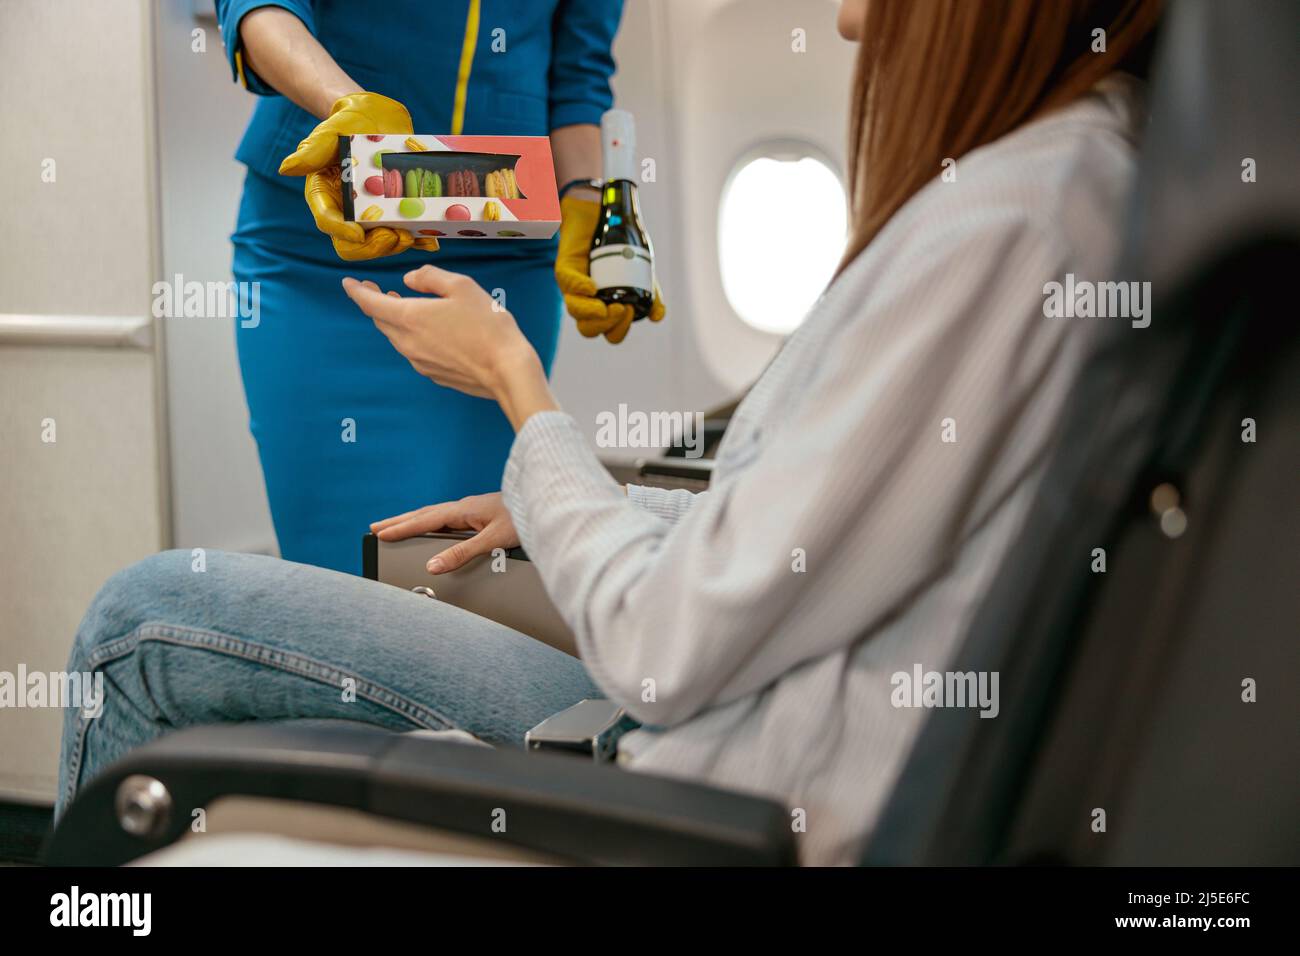 Stewardess offering food and drink to woman in airplane Stock Photo